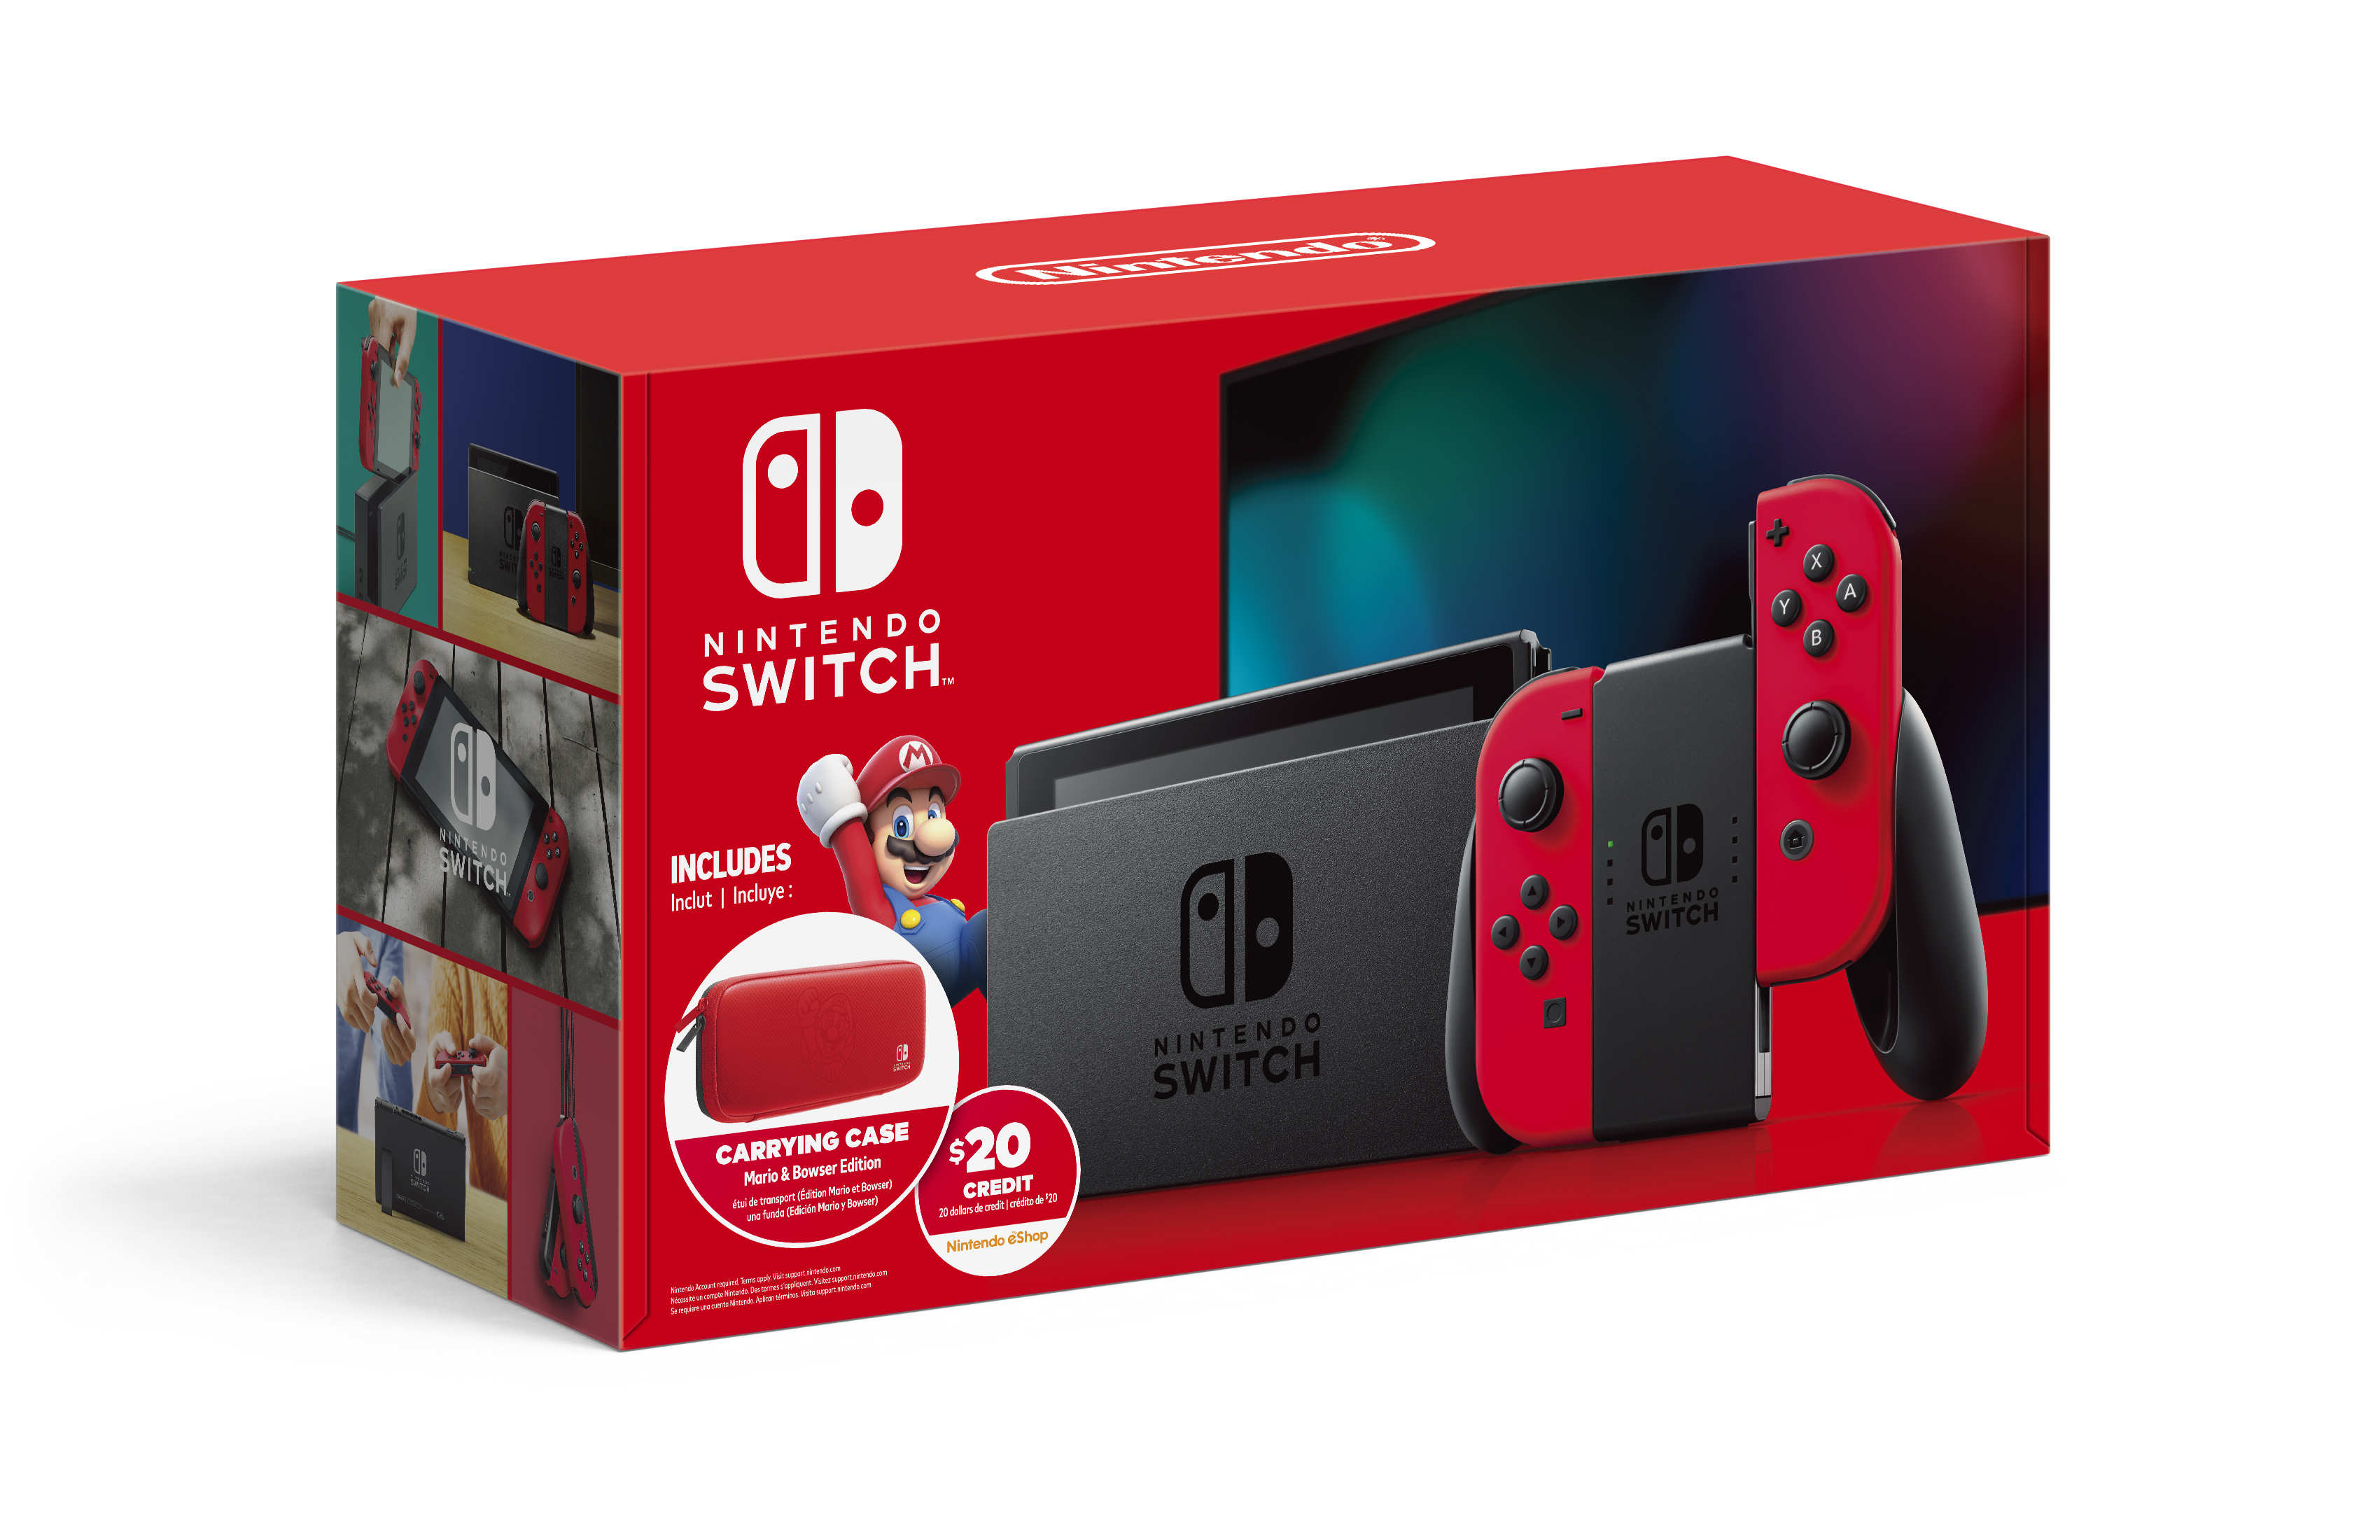 The Best Nintendo Switch Deal Today Includes a $20 Credit | Digital Trends